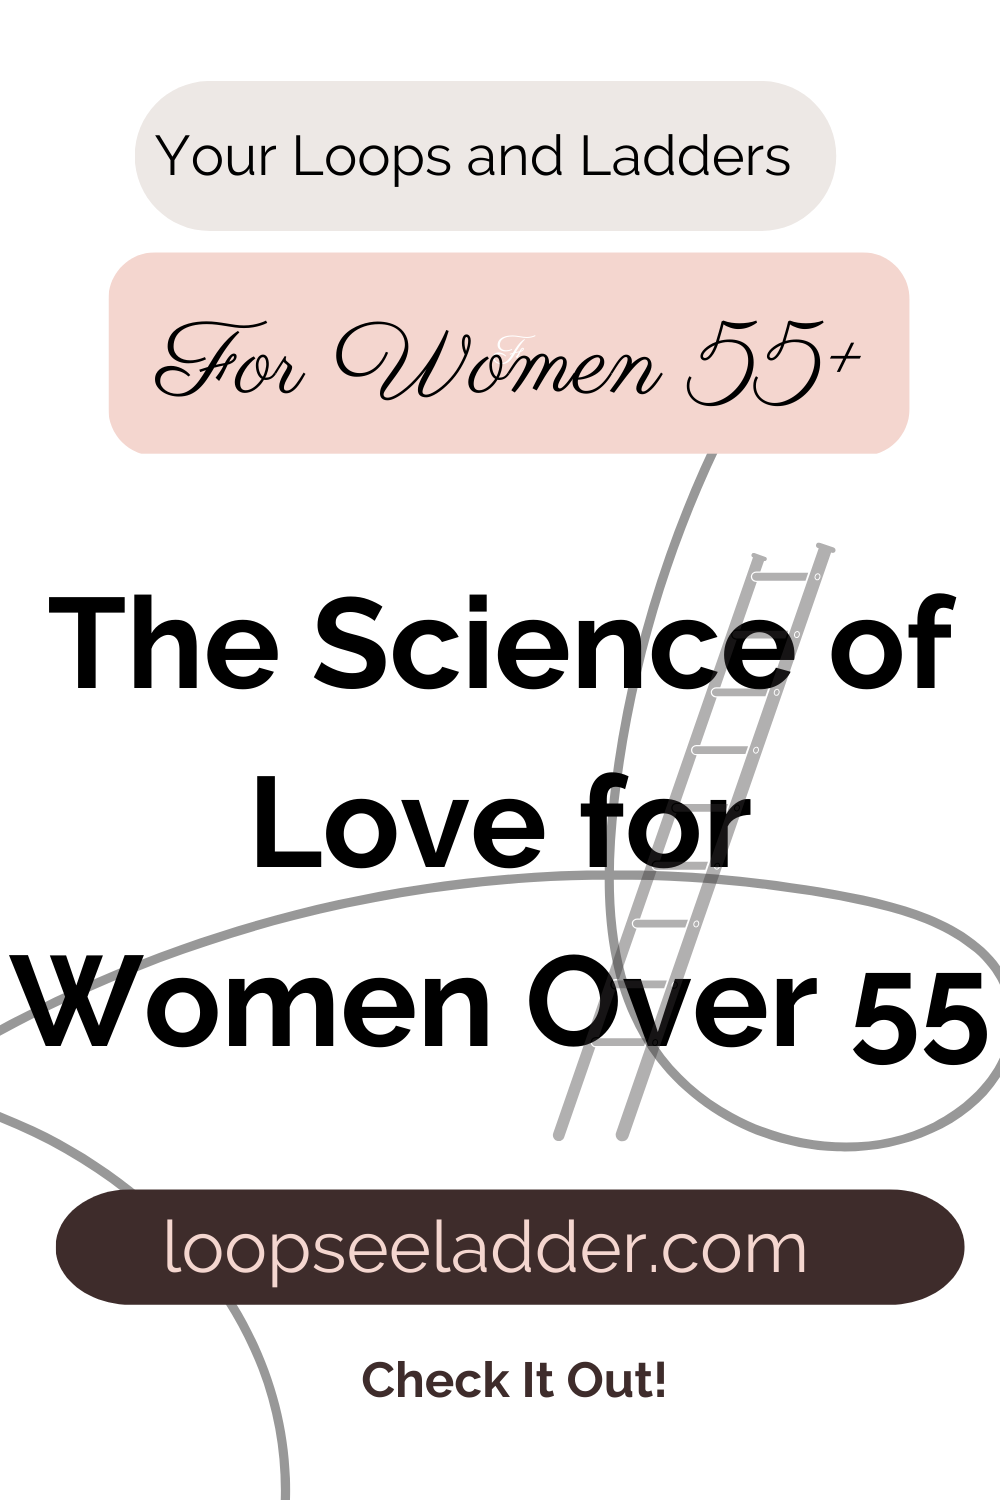 The Science of Love for Women Over 55